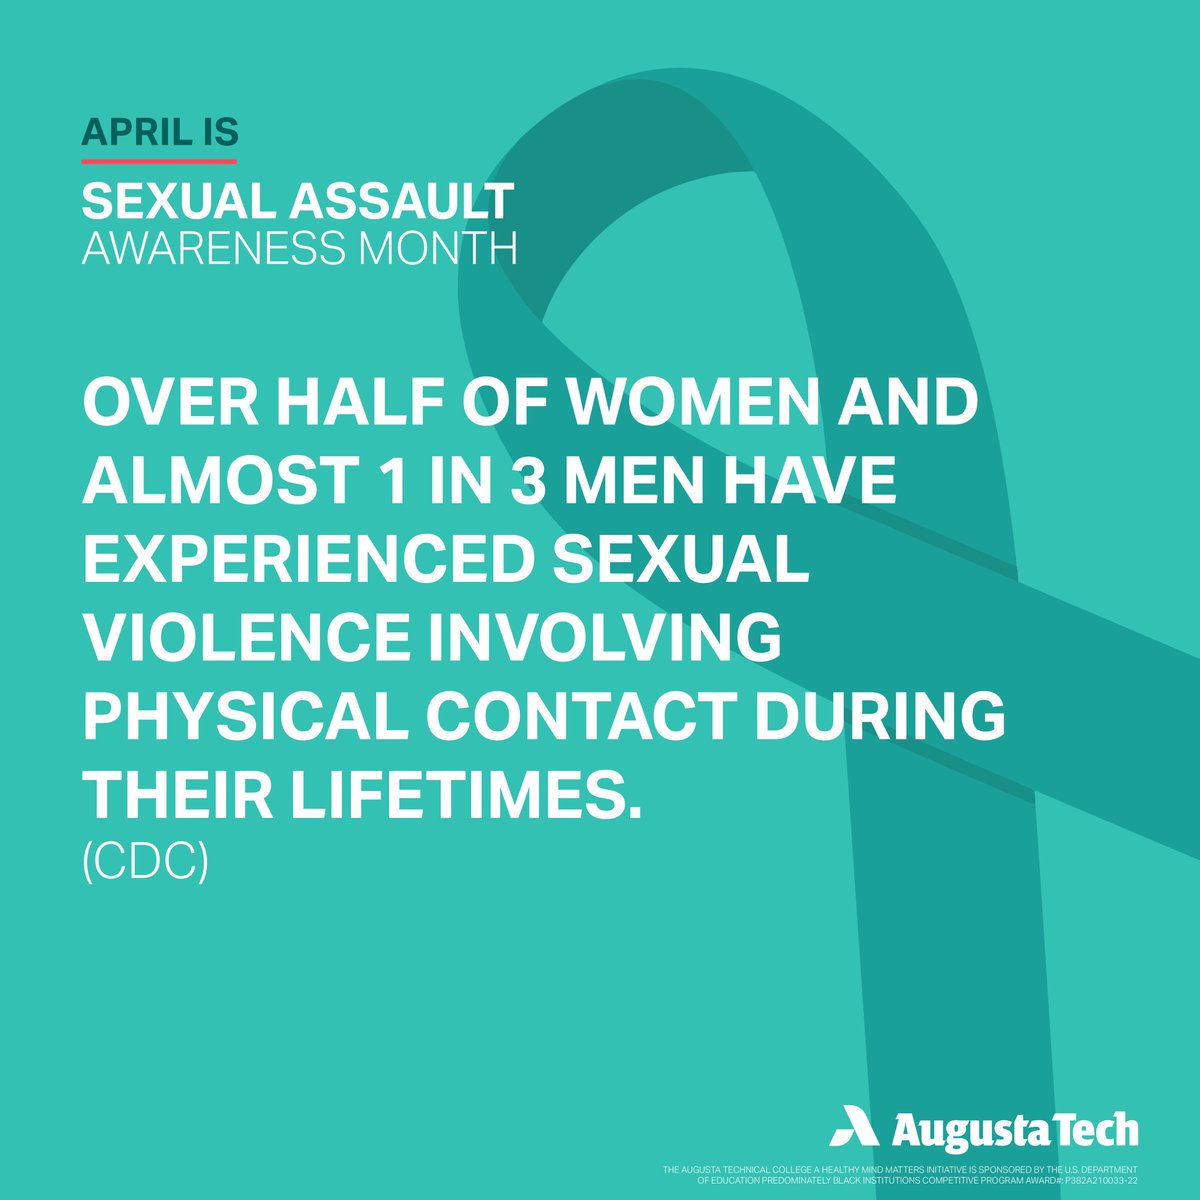 Did you know? Over 1/2 of women and almost 1 in 3 men have experienced sexual violence involving physical contact during their lifetimes. Let's work together to create a safer and more supportive world for all. #EndSexualViolence